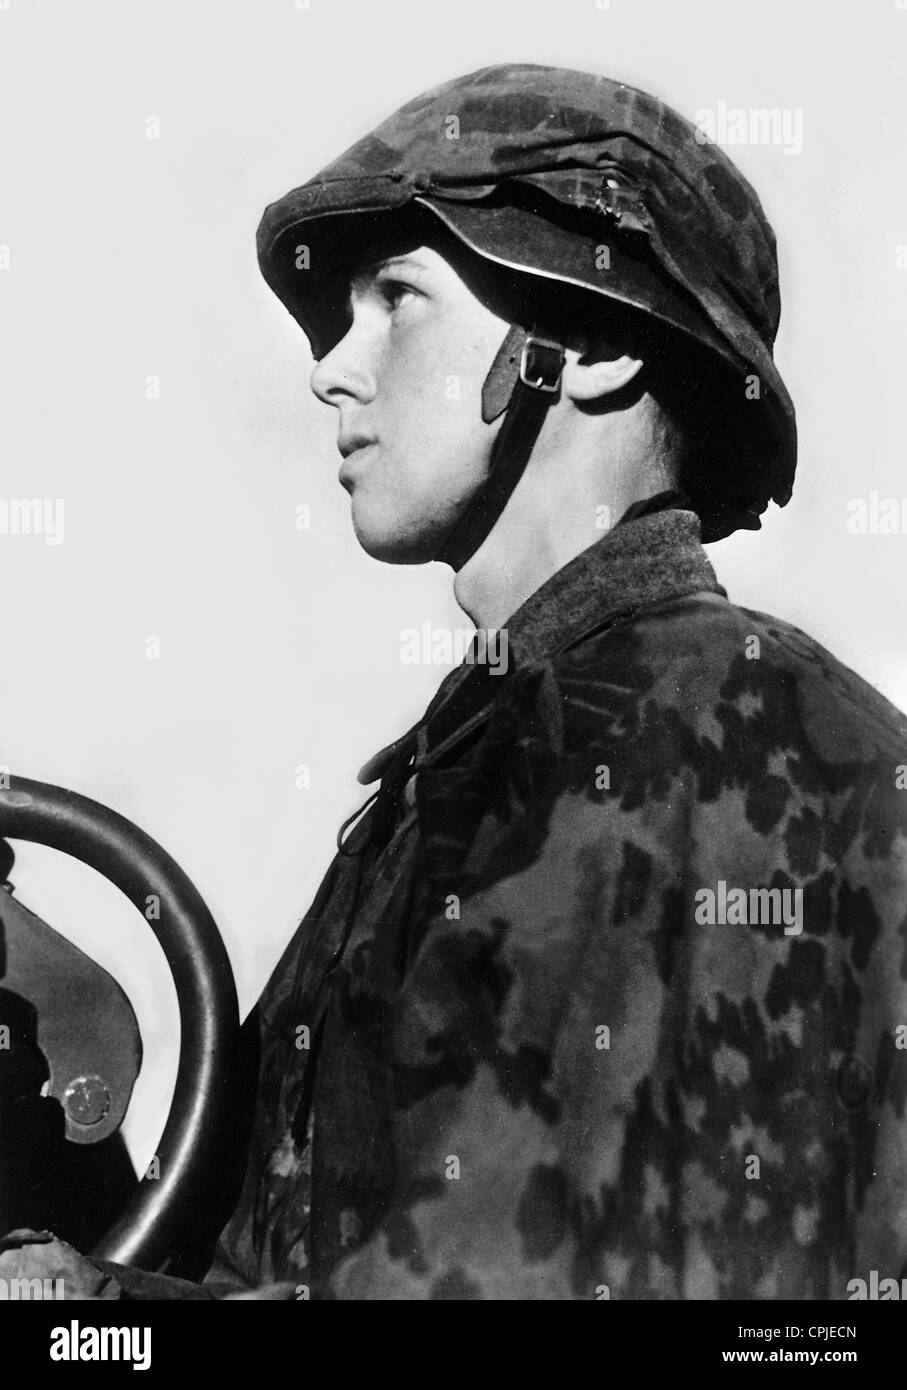 A Swedish volunteer of the Waffen-SS, 1941 Stock Photo